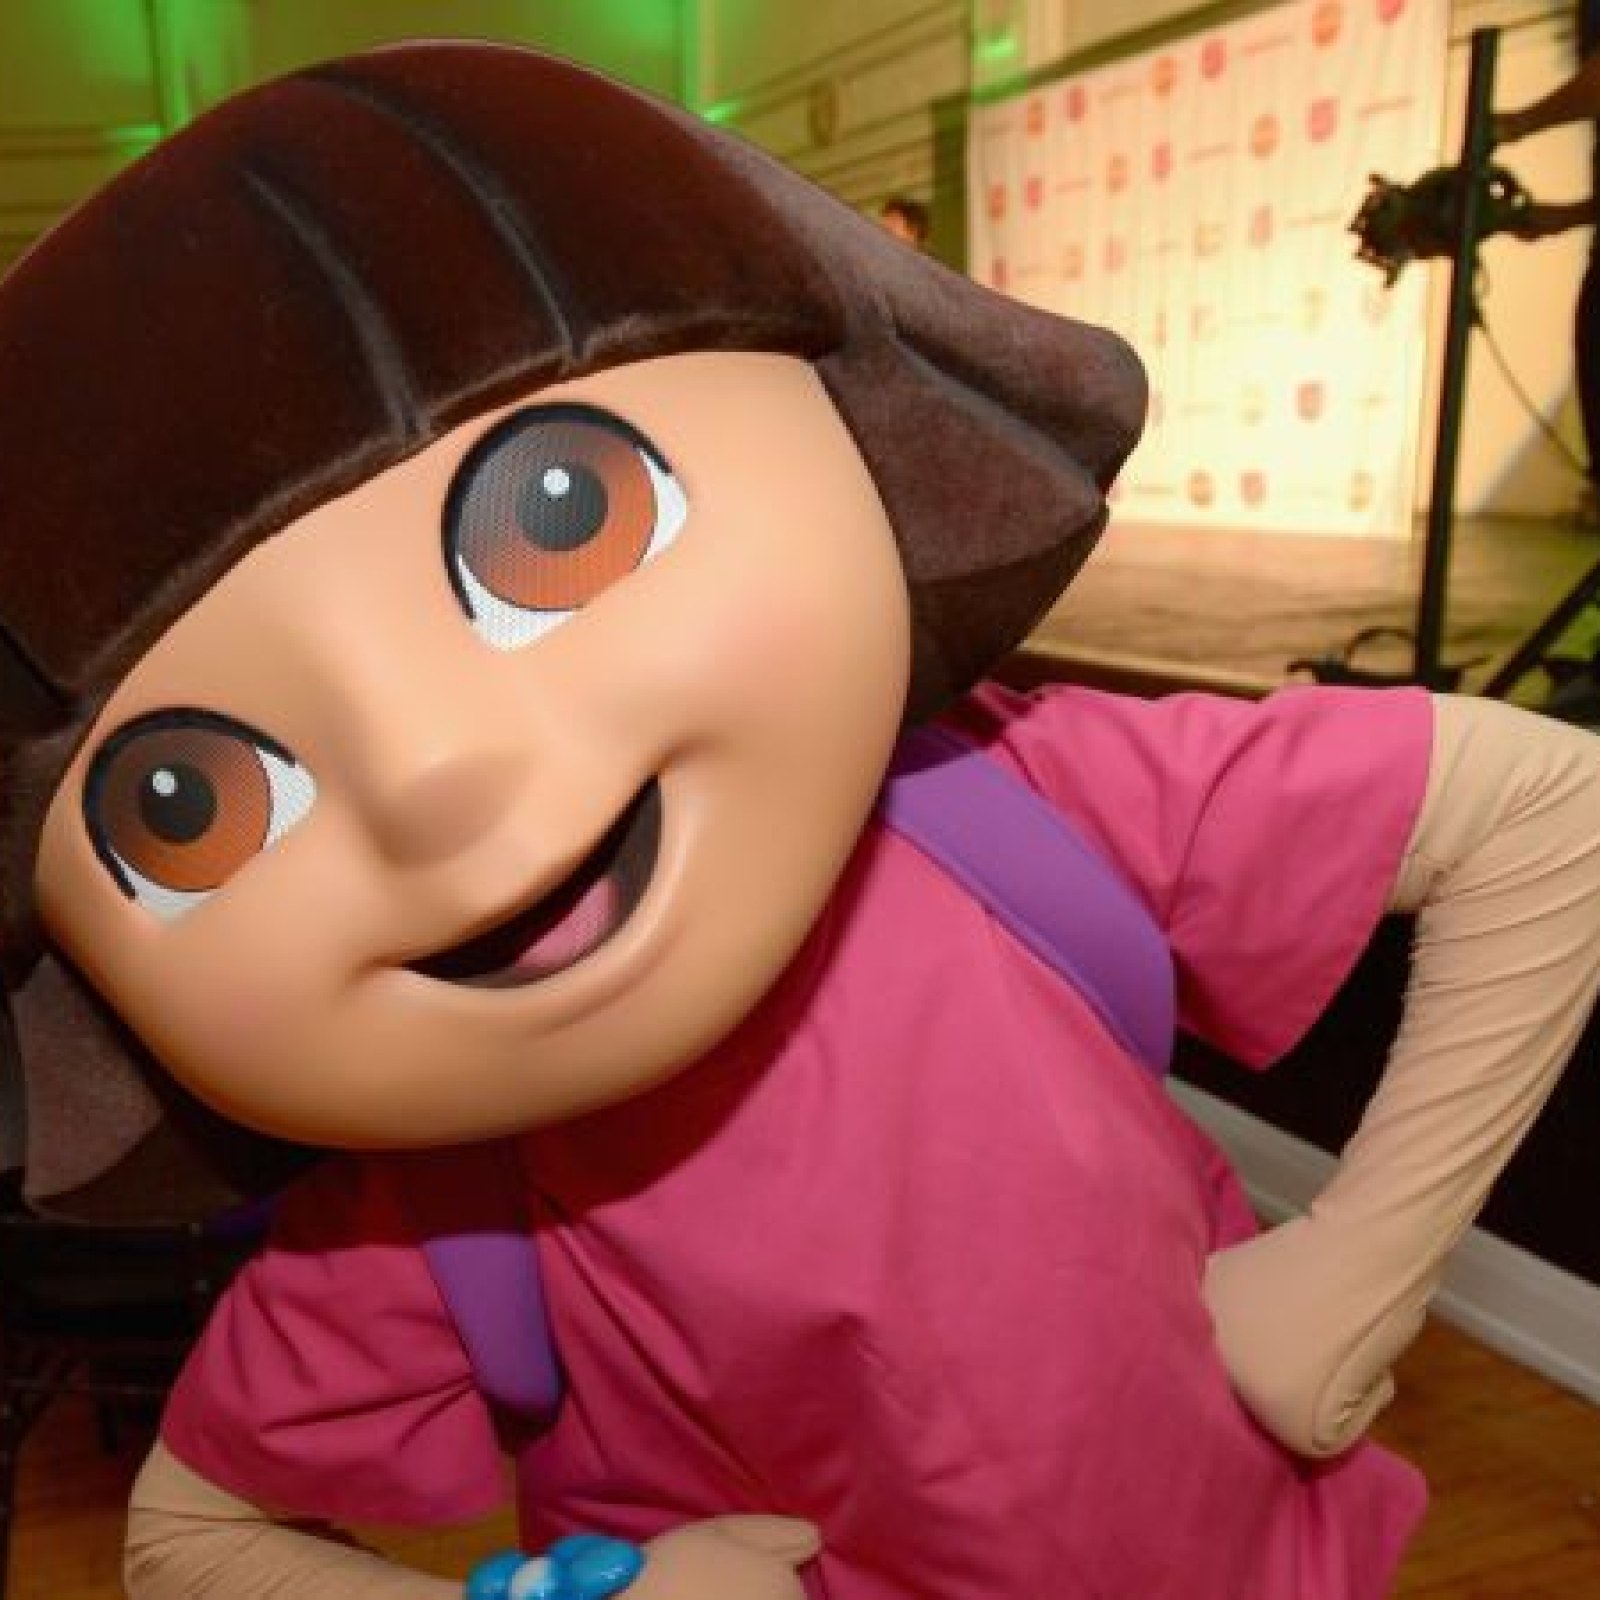 No Michael Bay Is Not The Dora The Explorer Live Action Movie Producer